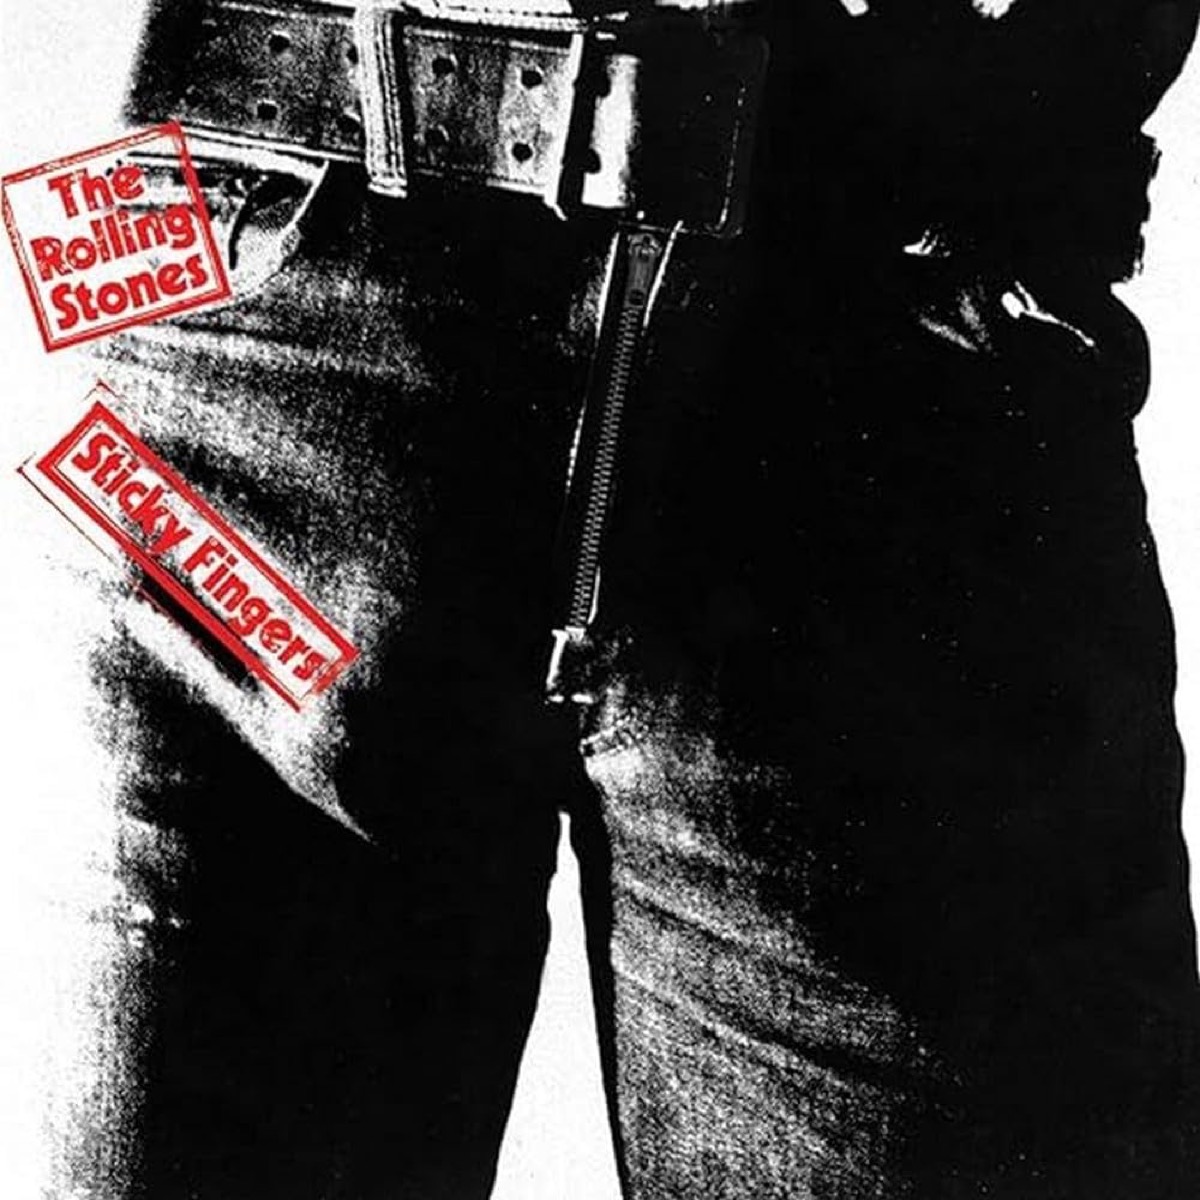 "Sticky Fingers" by The Rolling Stones album cover